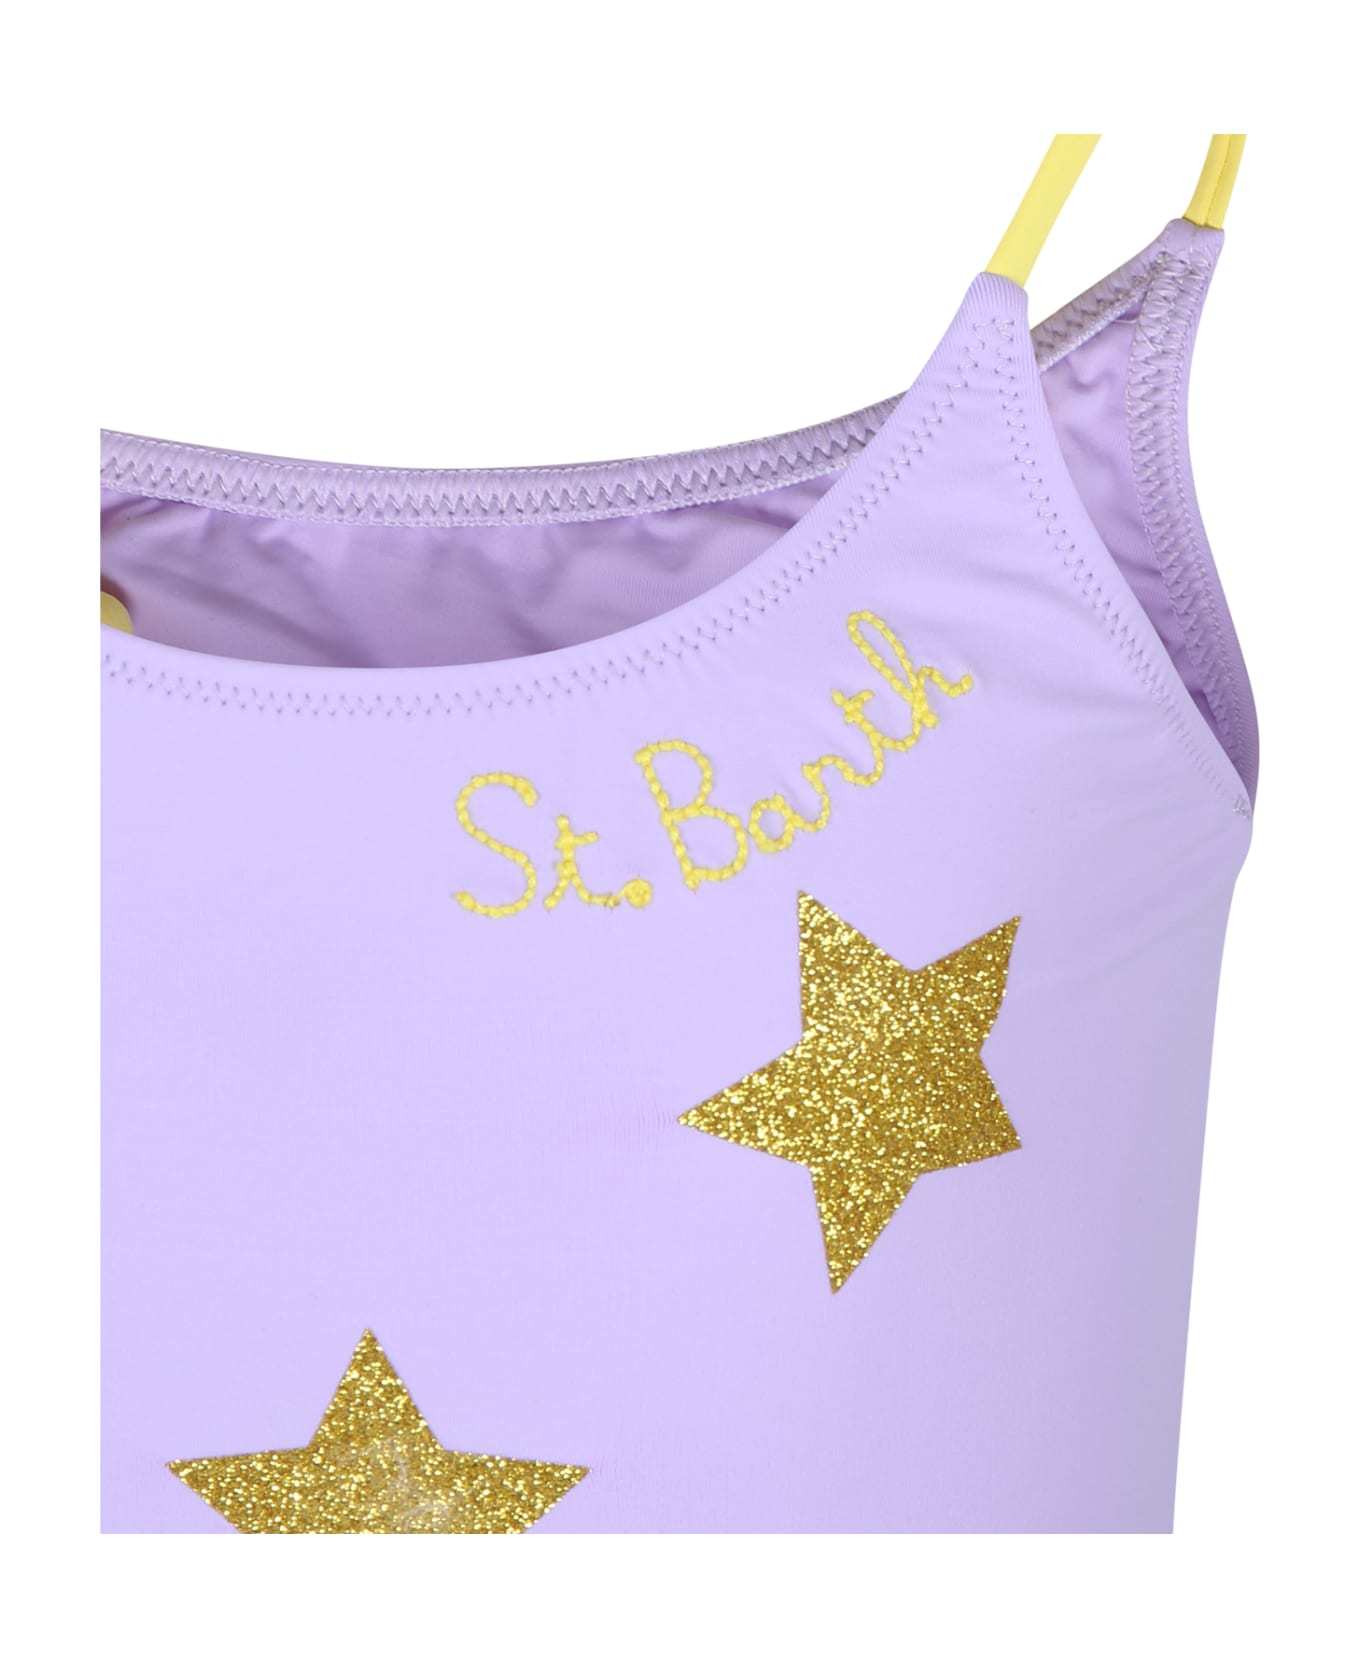 MC2 Saint Barth Purple Swimsuit For Girl With Stars - Violet